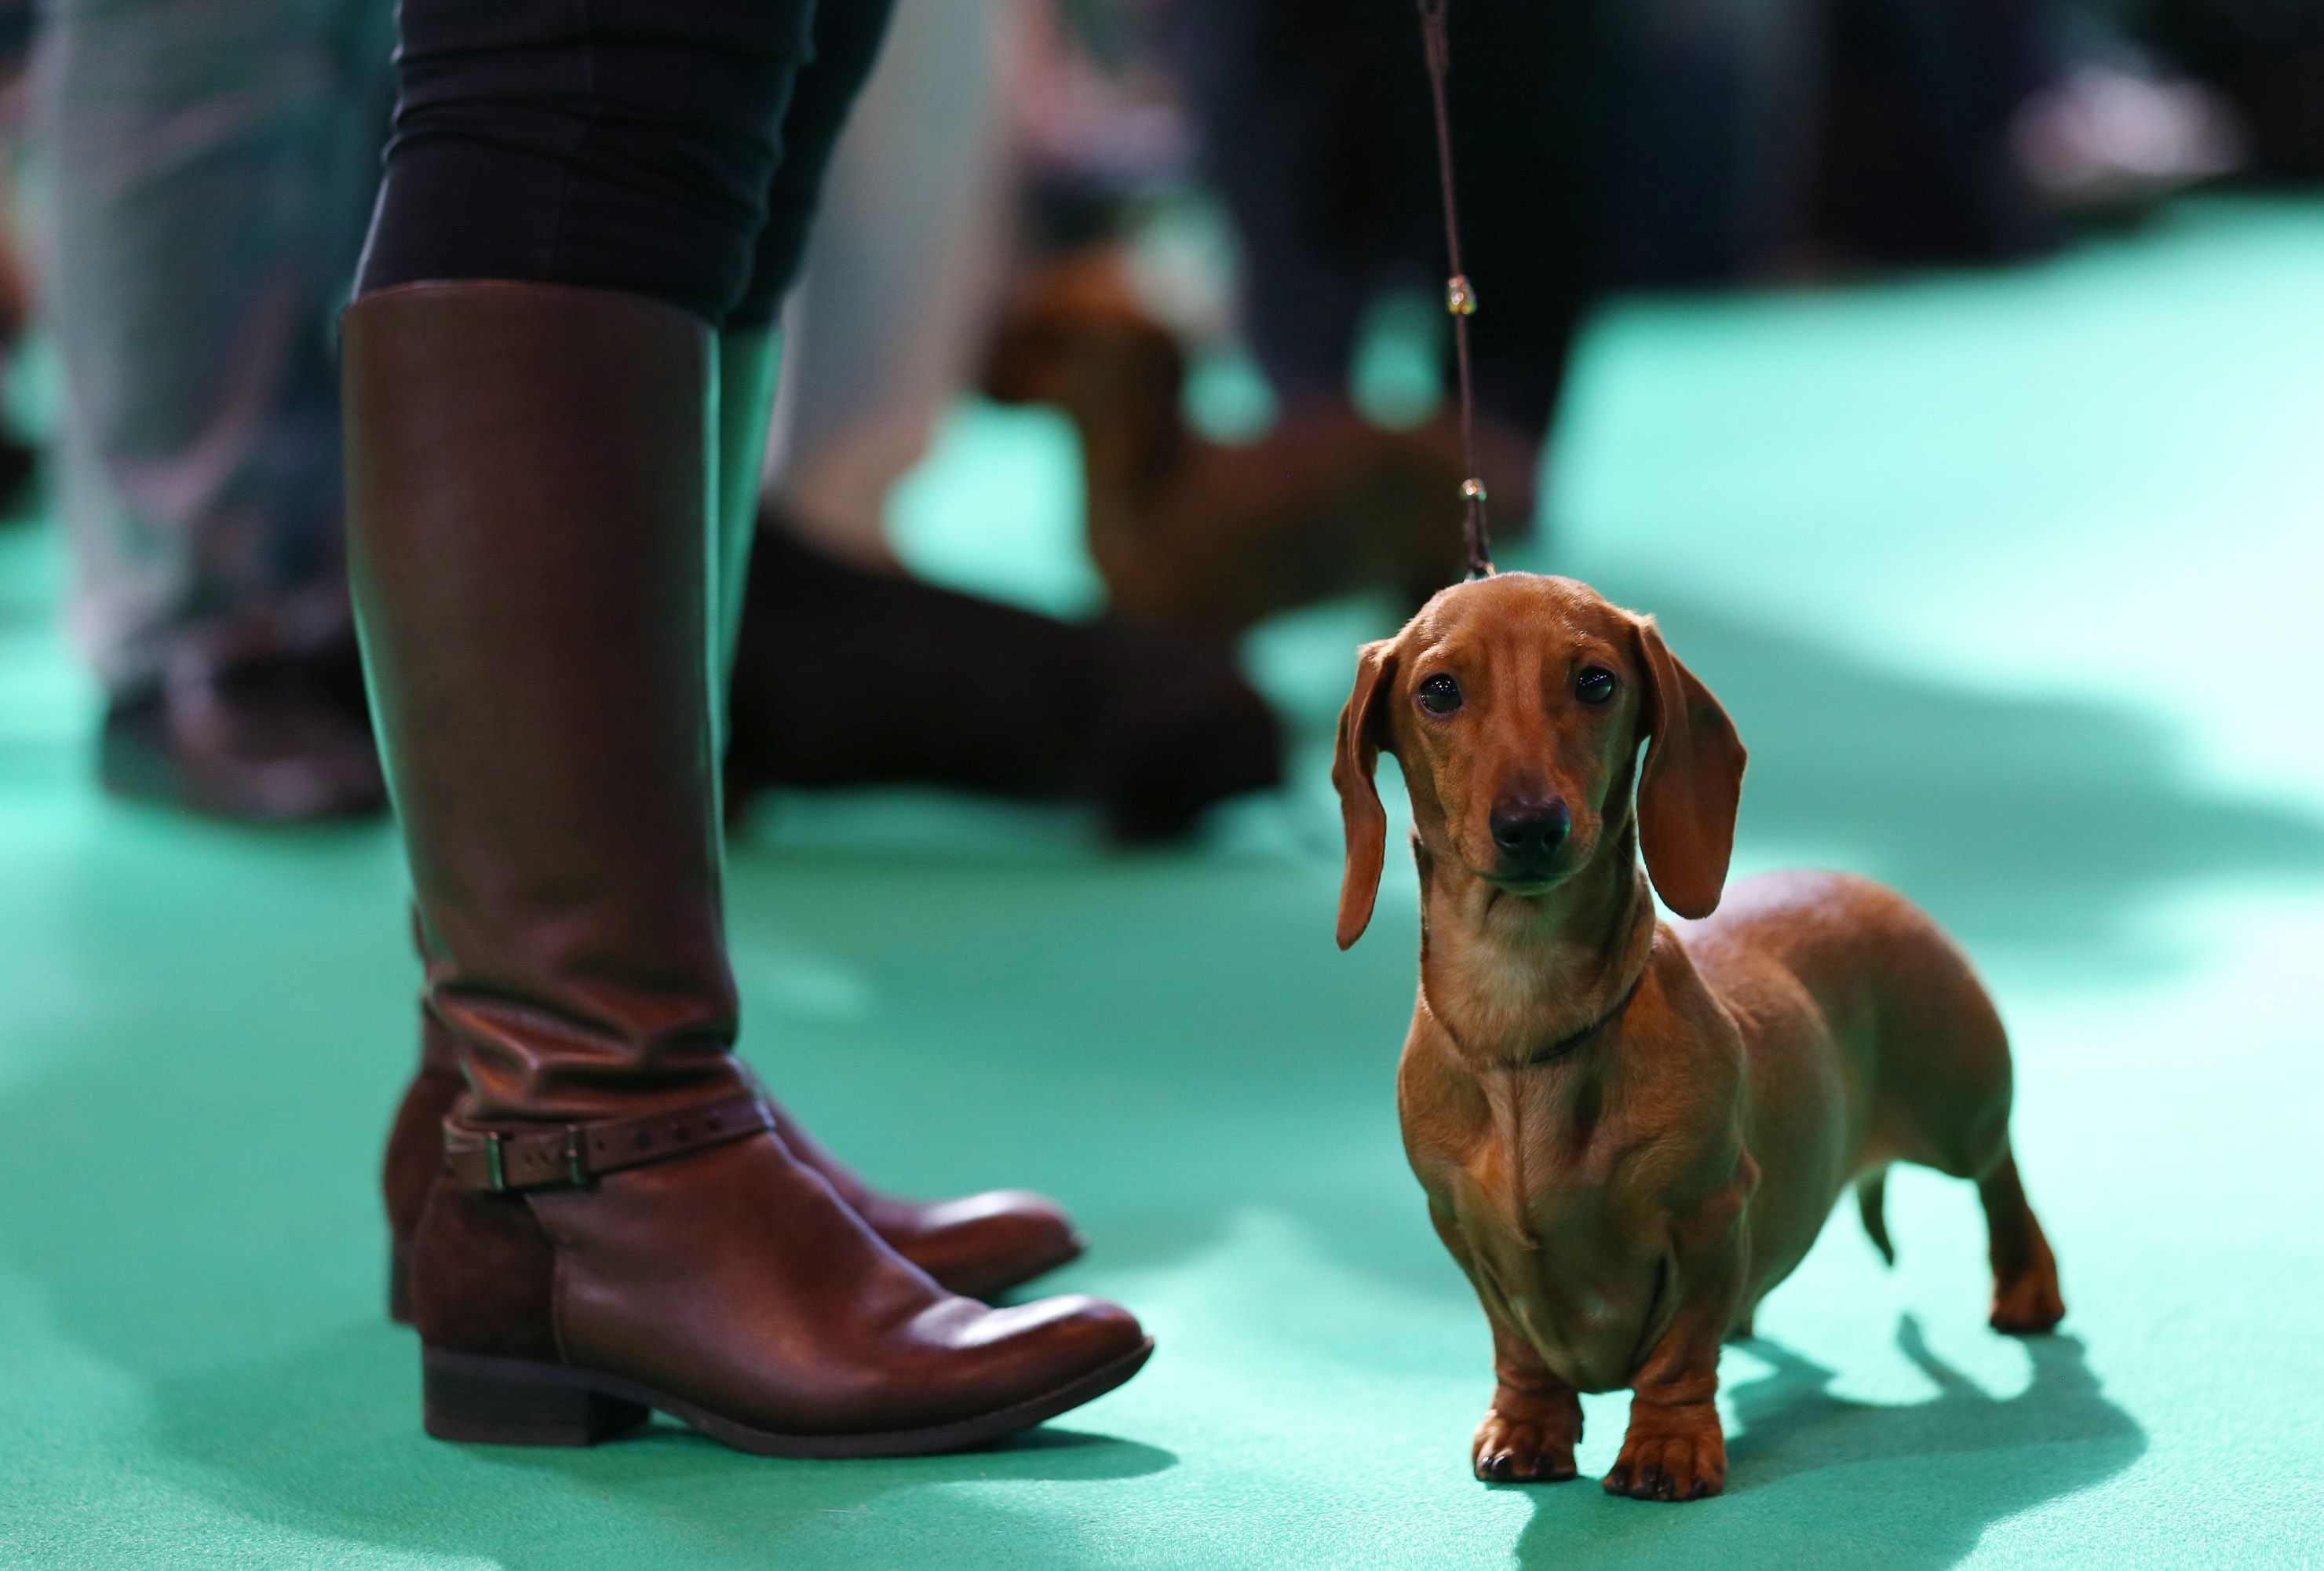 BIRMINGHAM, ENGLAND - MARCH 07:Dachshund hounds are judged in a show ring on the second day of the Crufts dog show at the NEC on March 7, 2014 in Birmingham, England. Said to be the largest s